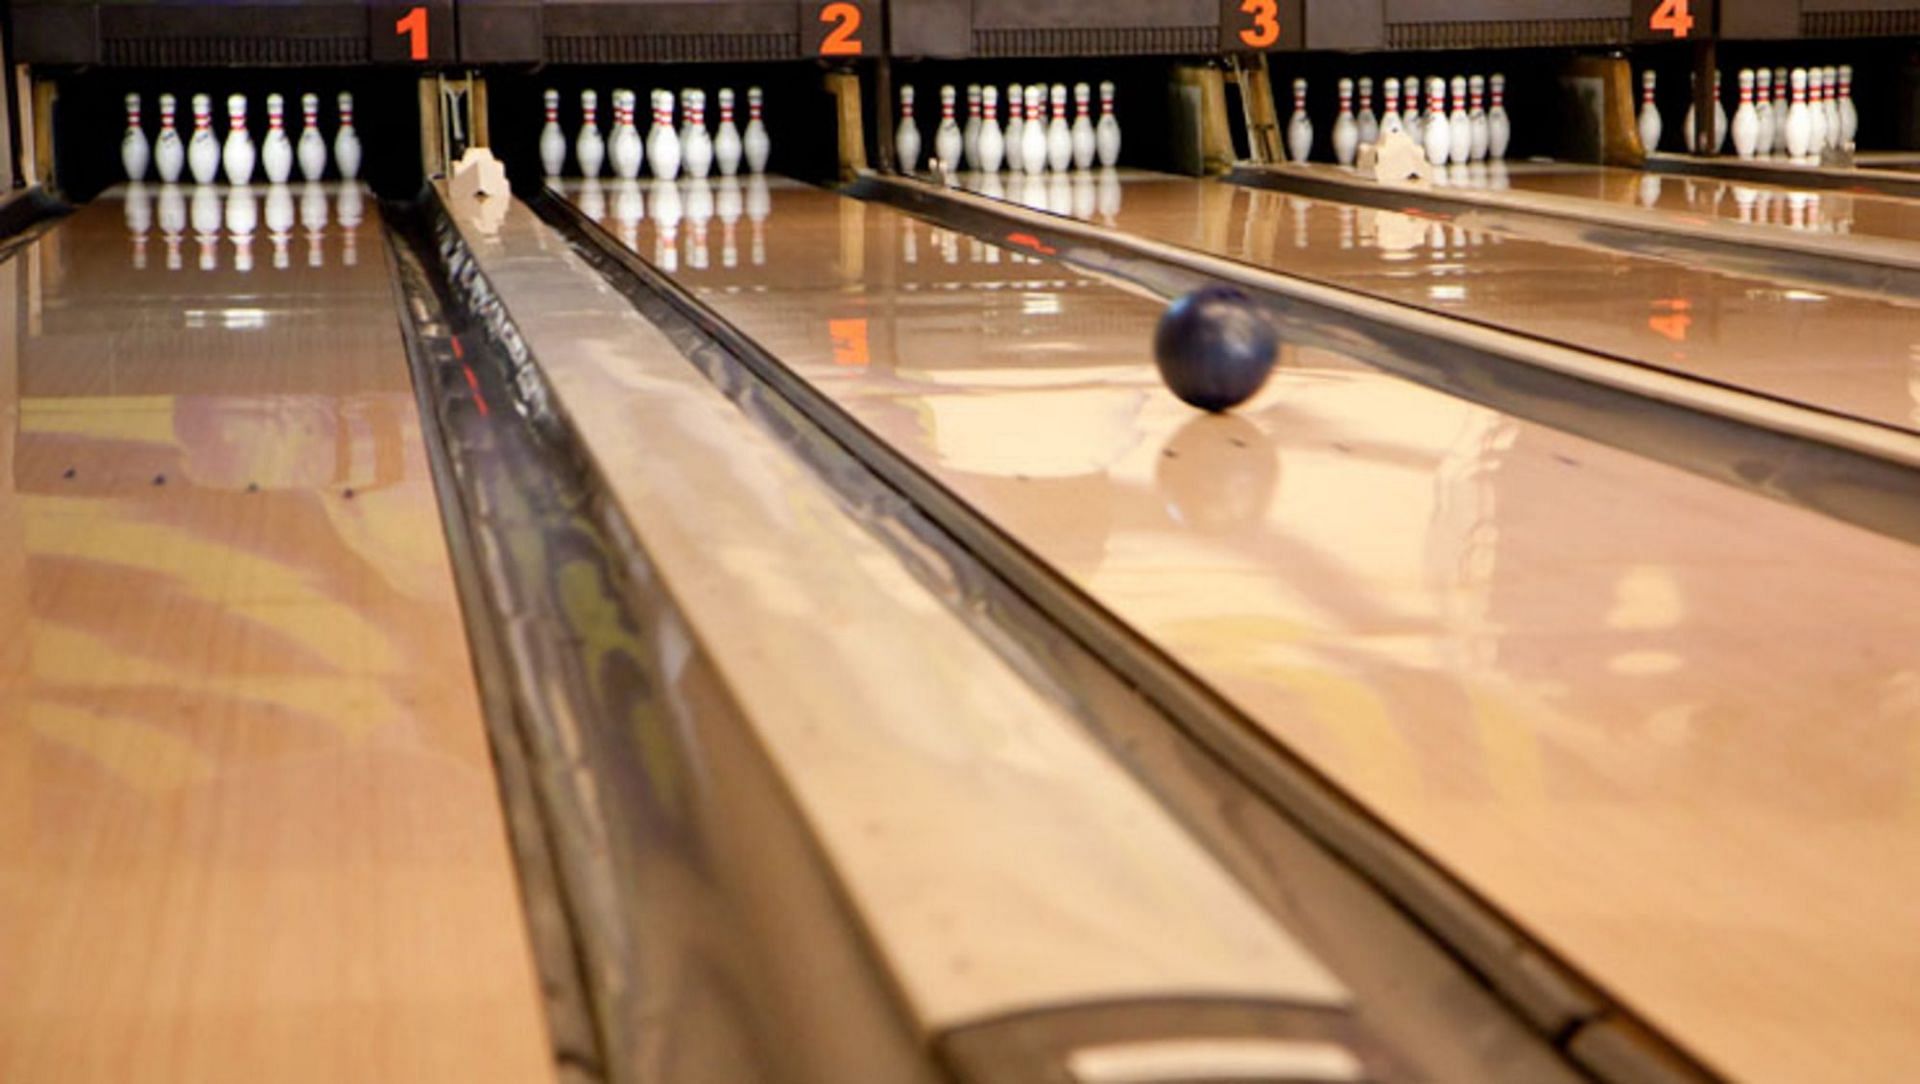 Couple get arrested in bowling alley for engaging in s*xual acts in a public place (Image via Shutterstock)